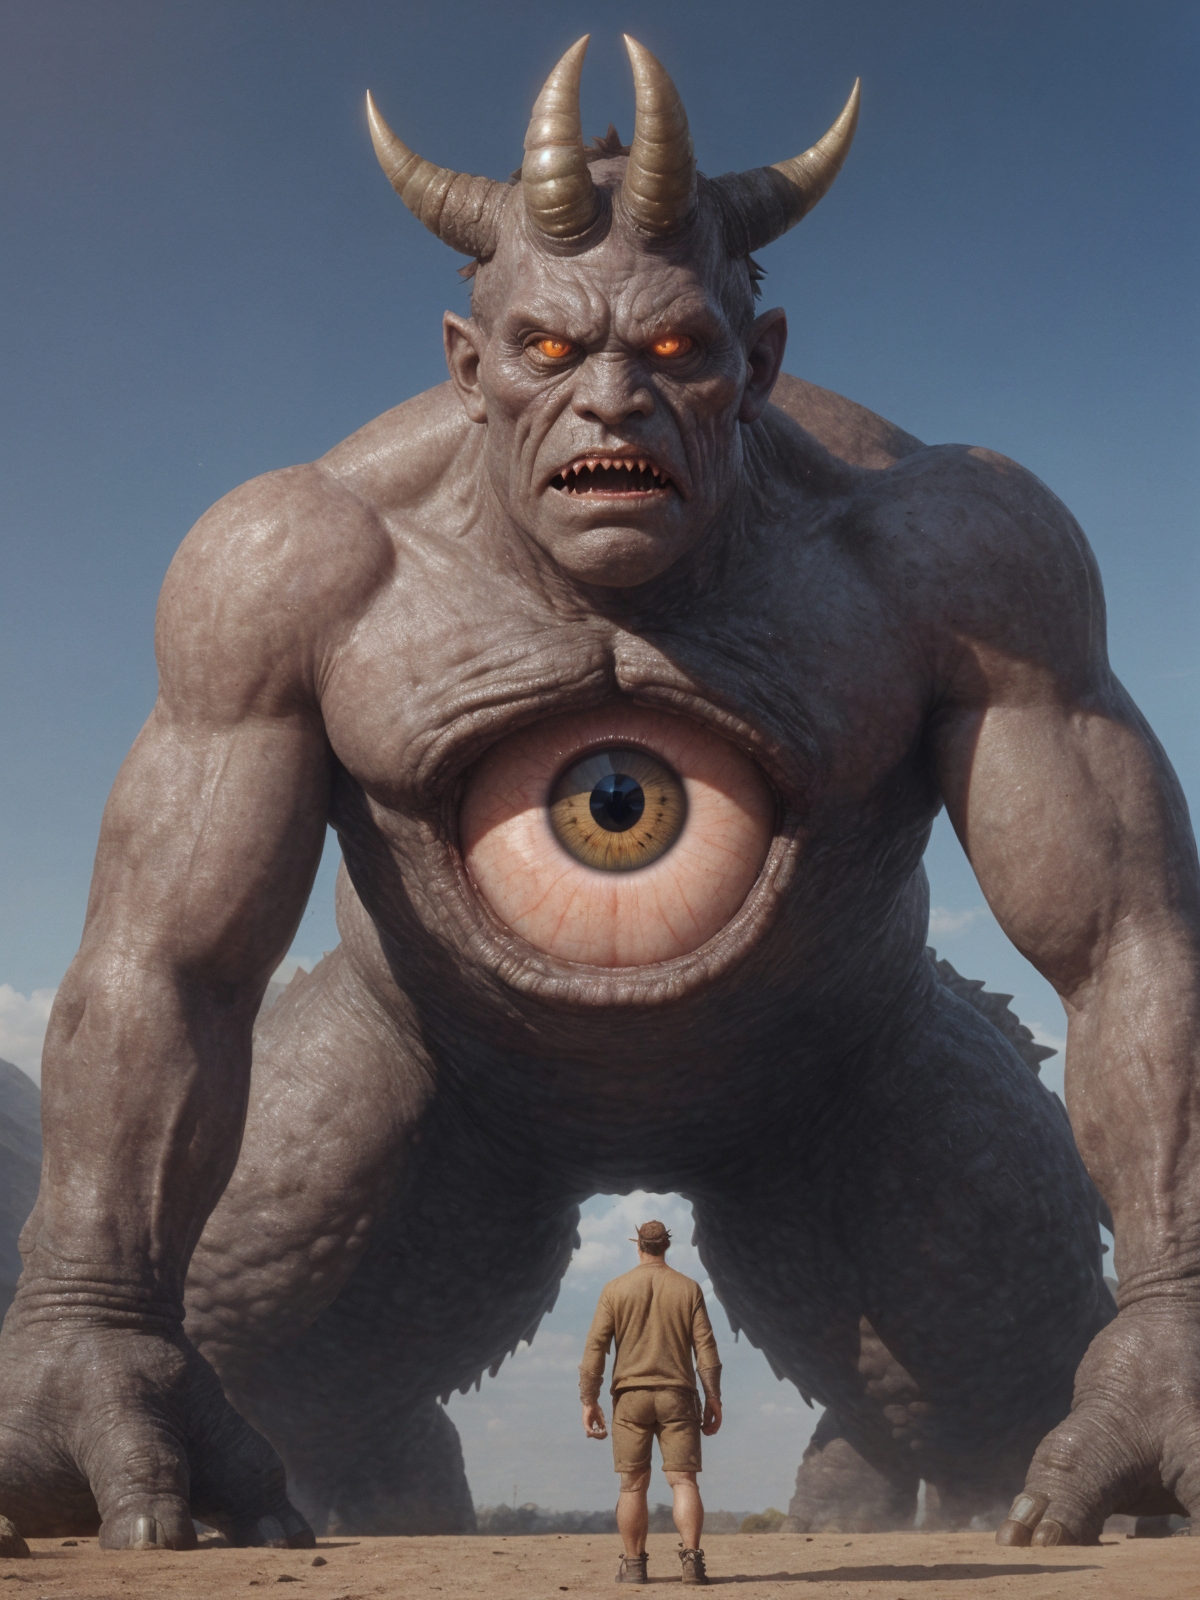 Man standing in front of a monster with horns and an eye.